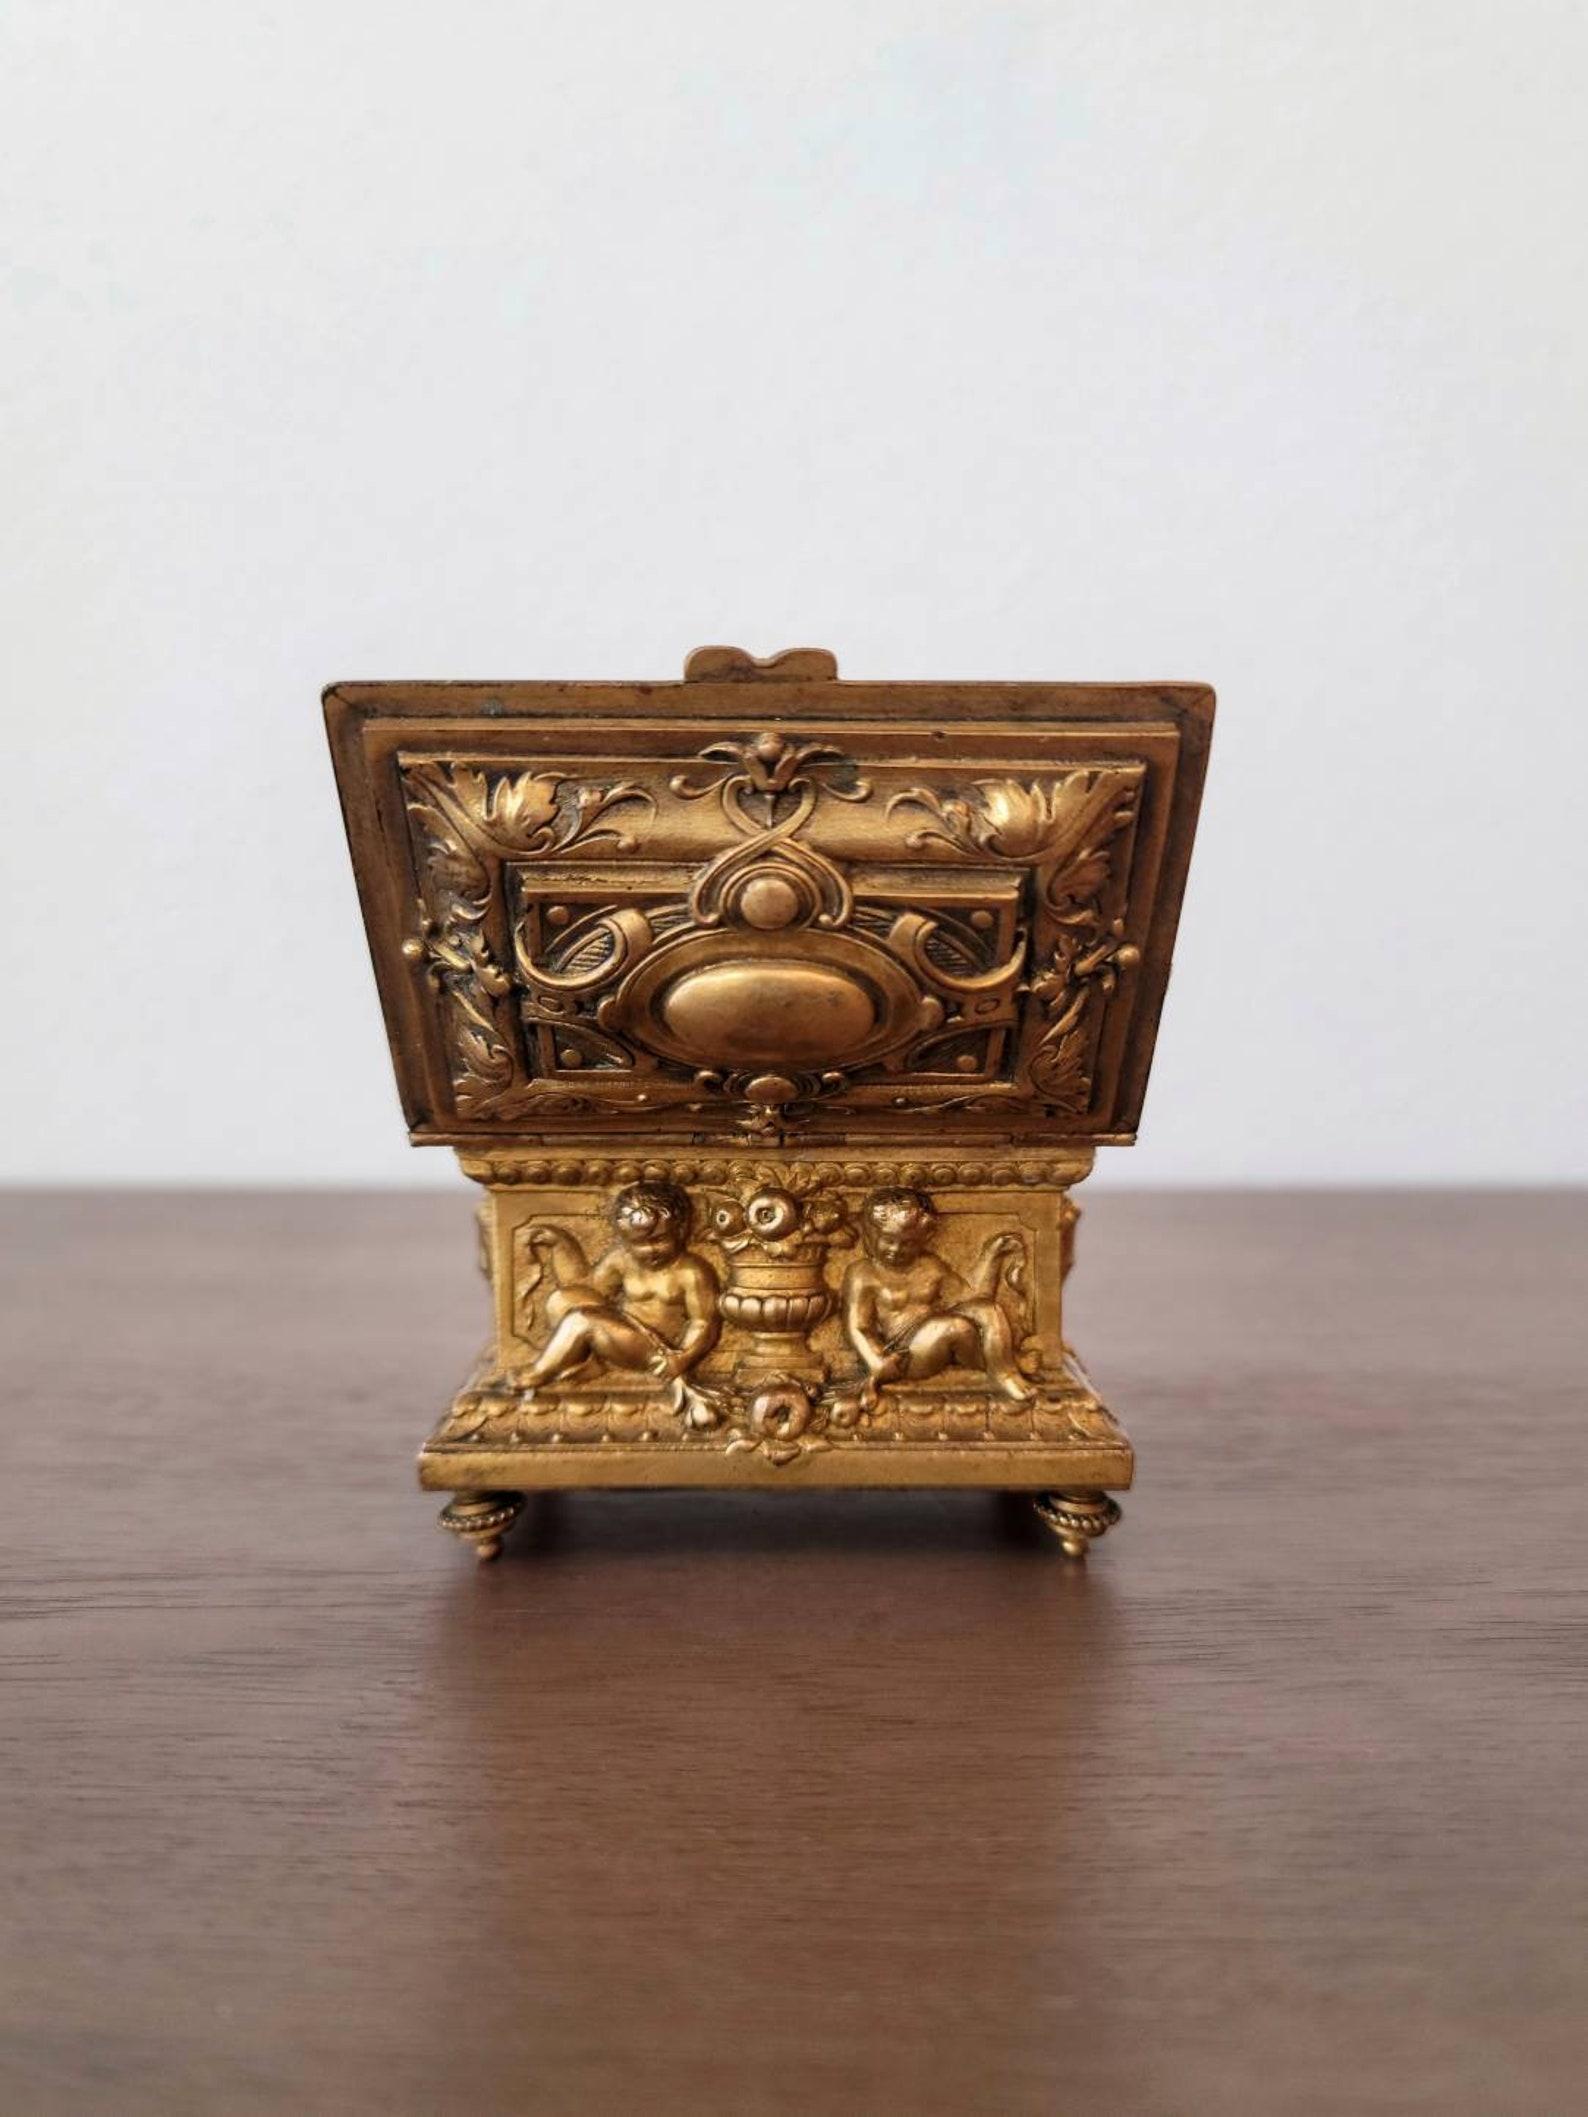 Petite Antique French Neoclassical Gilt Bronze Jewel Casket For Sale 1